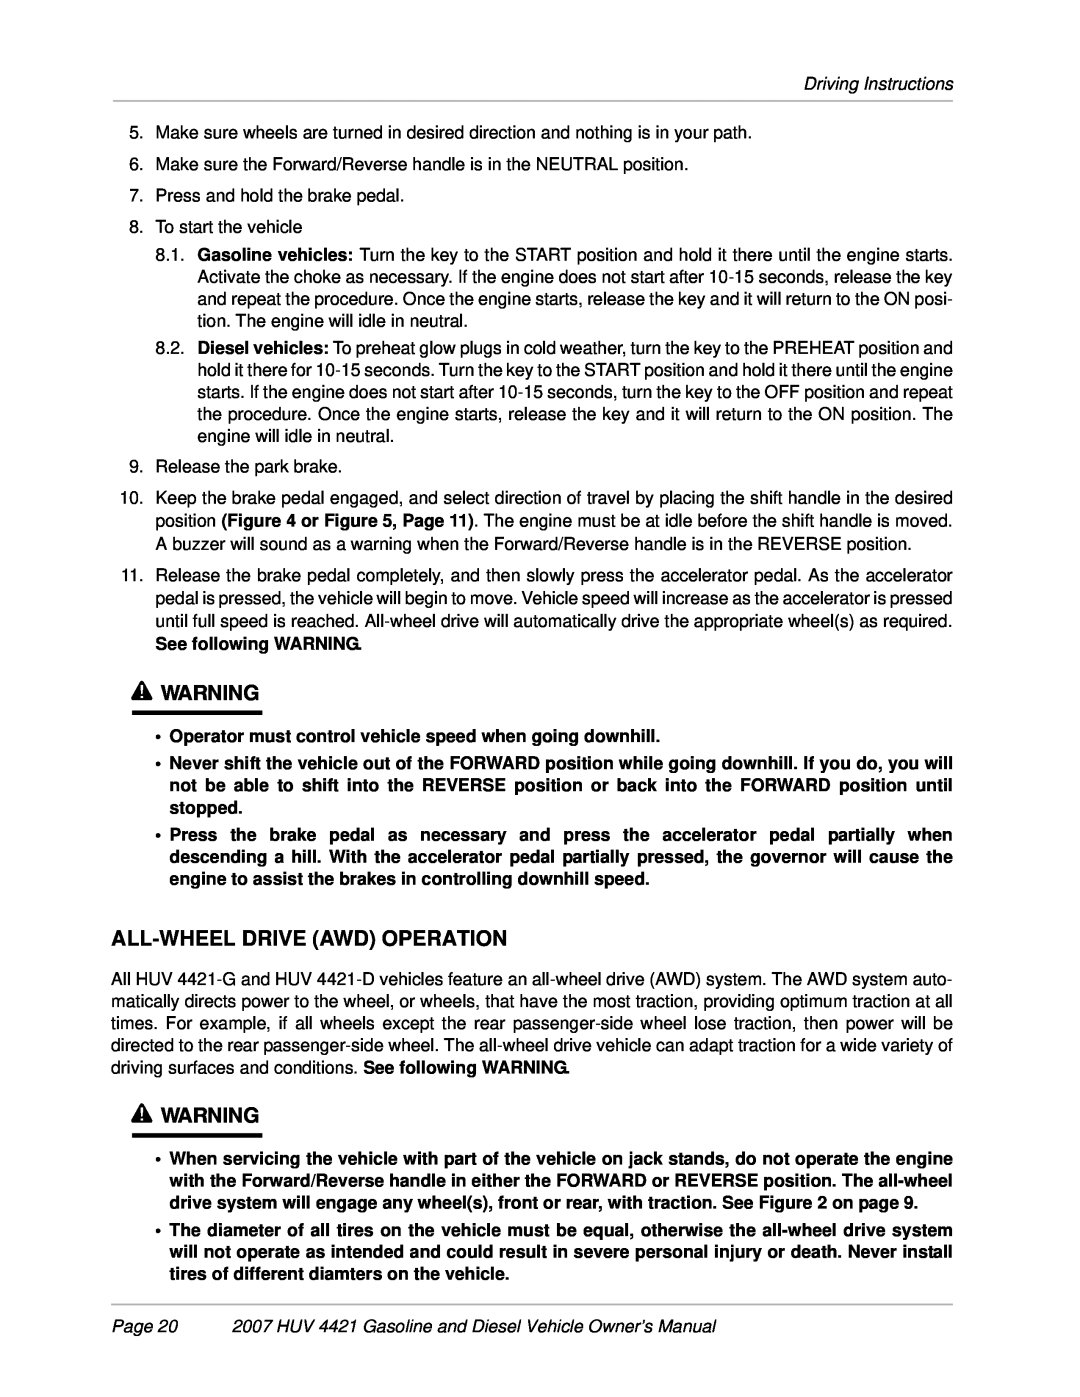 Husqvarna HUV 4421-G / GXP All-Wheel Drive Awd Operation, Page 20 2007 HUV 4421 Gasoline and Diesel Vehicle Owner’s Manual 